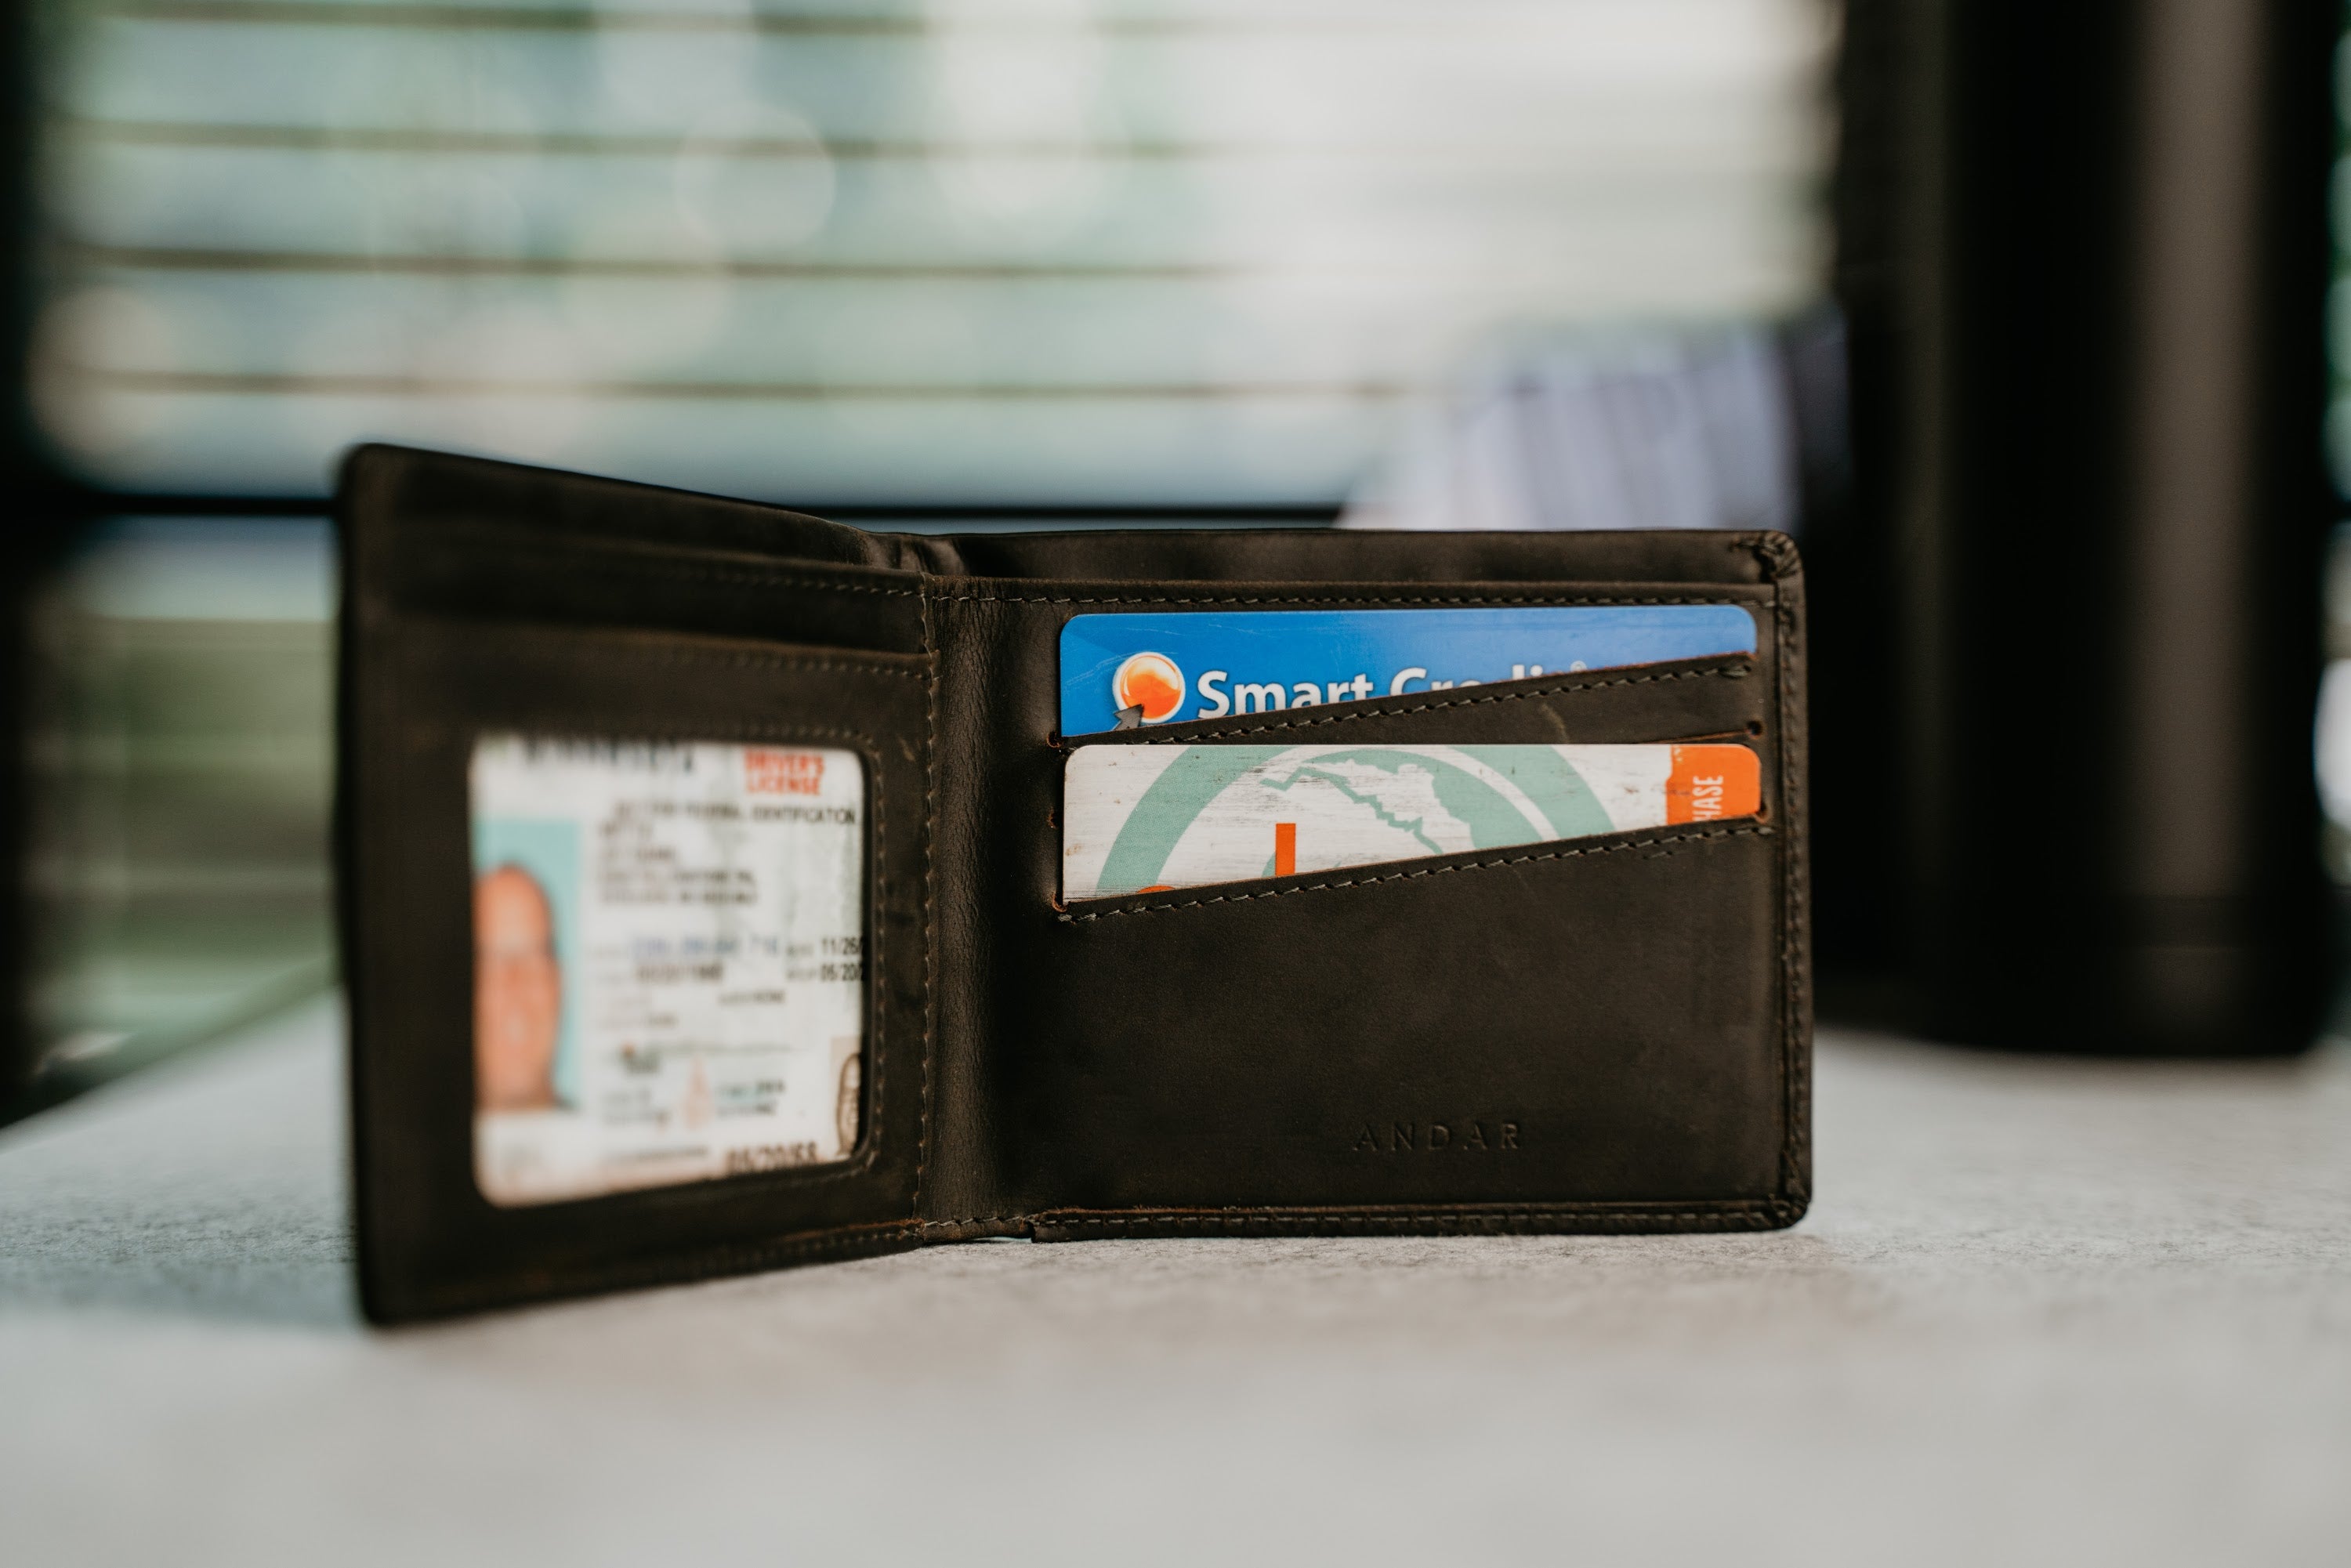 Wallet appreciation post. What kind of wallet do you carry daily